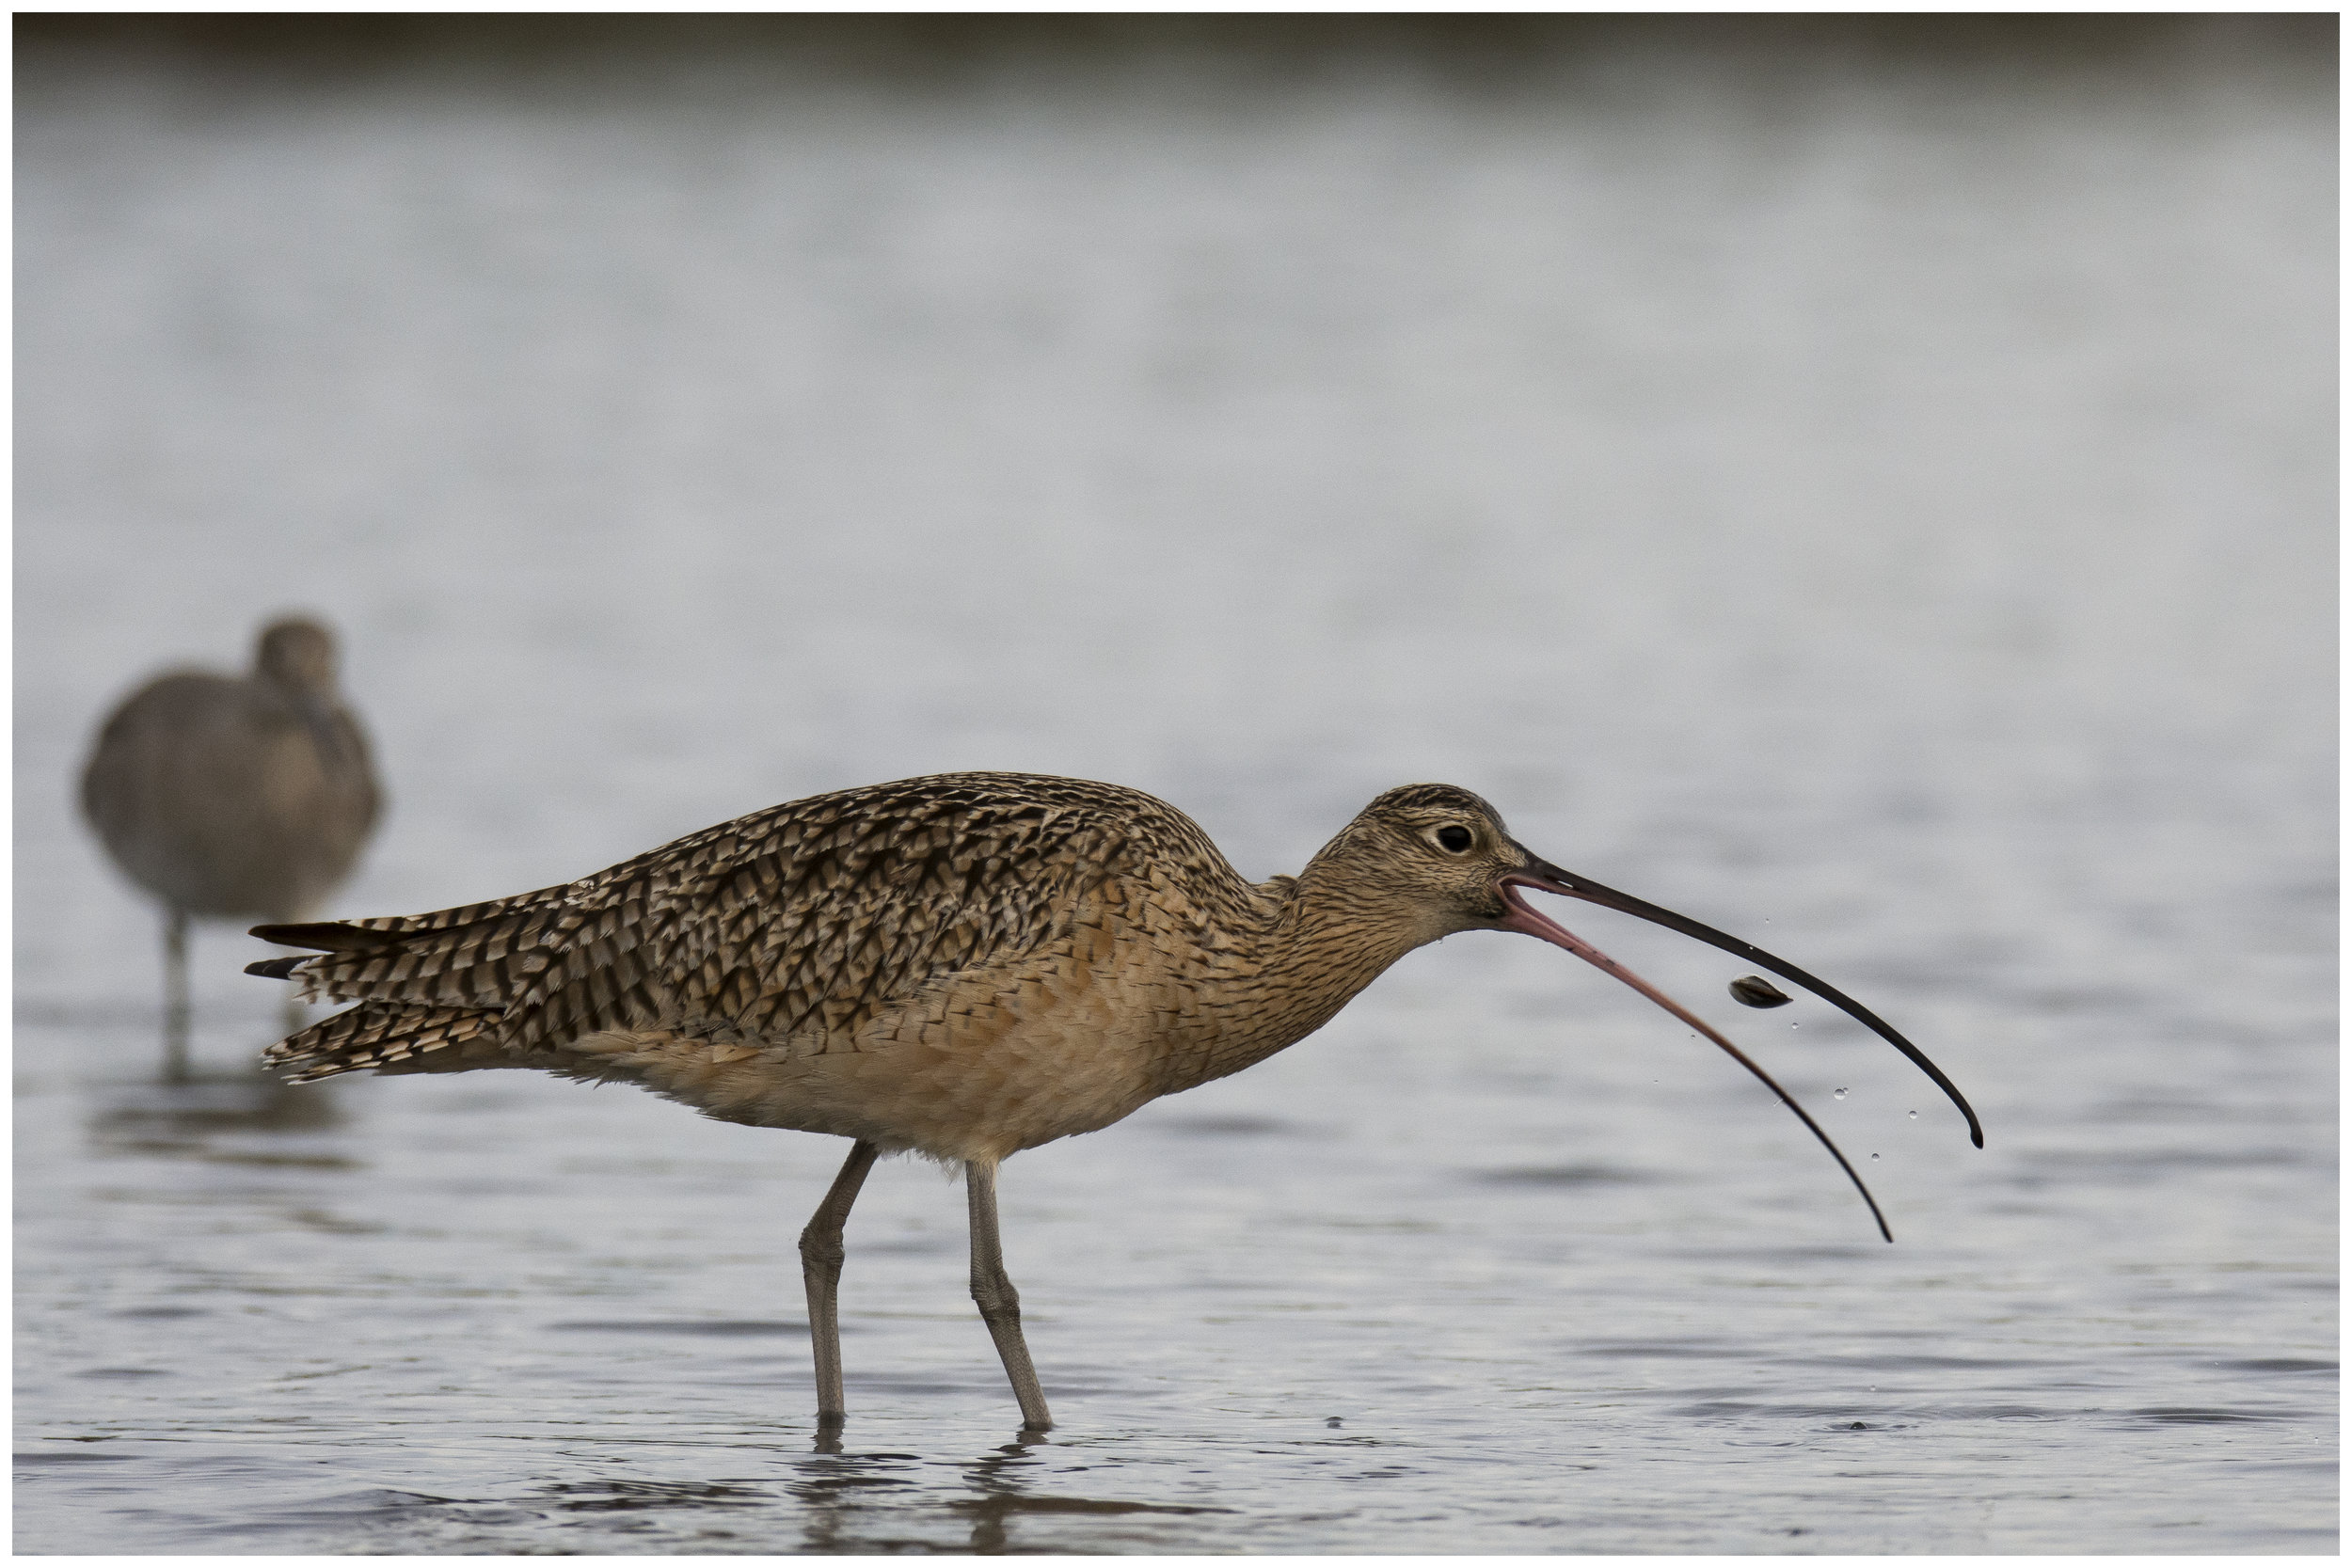  Long-billed Curlew, 2018 